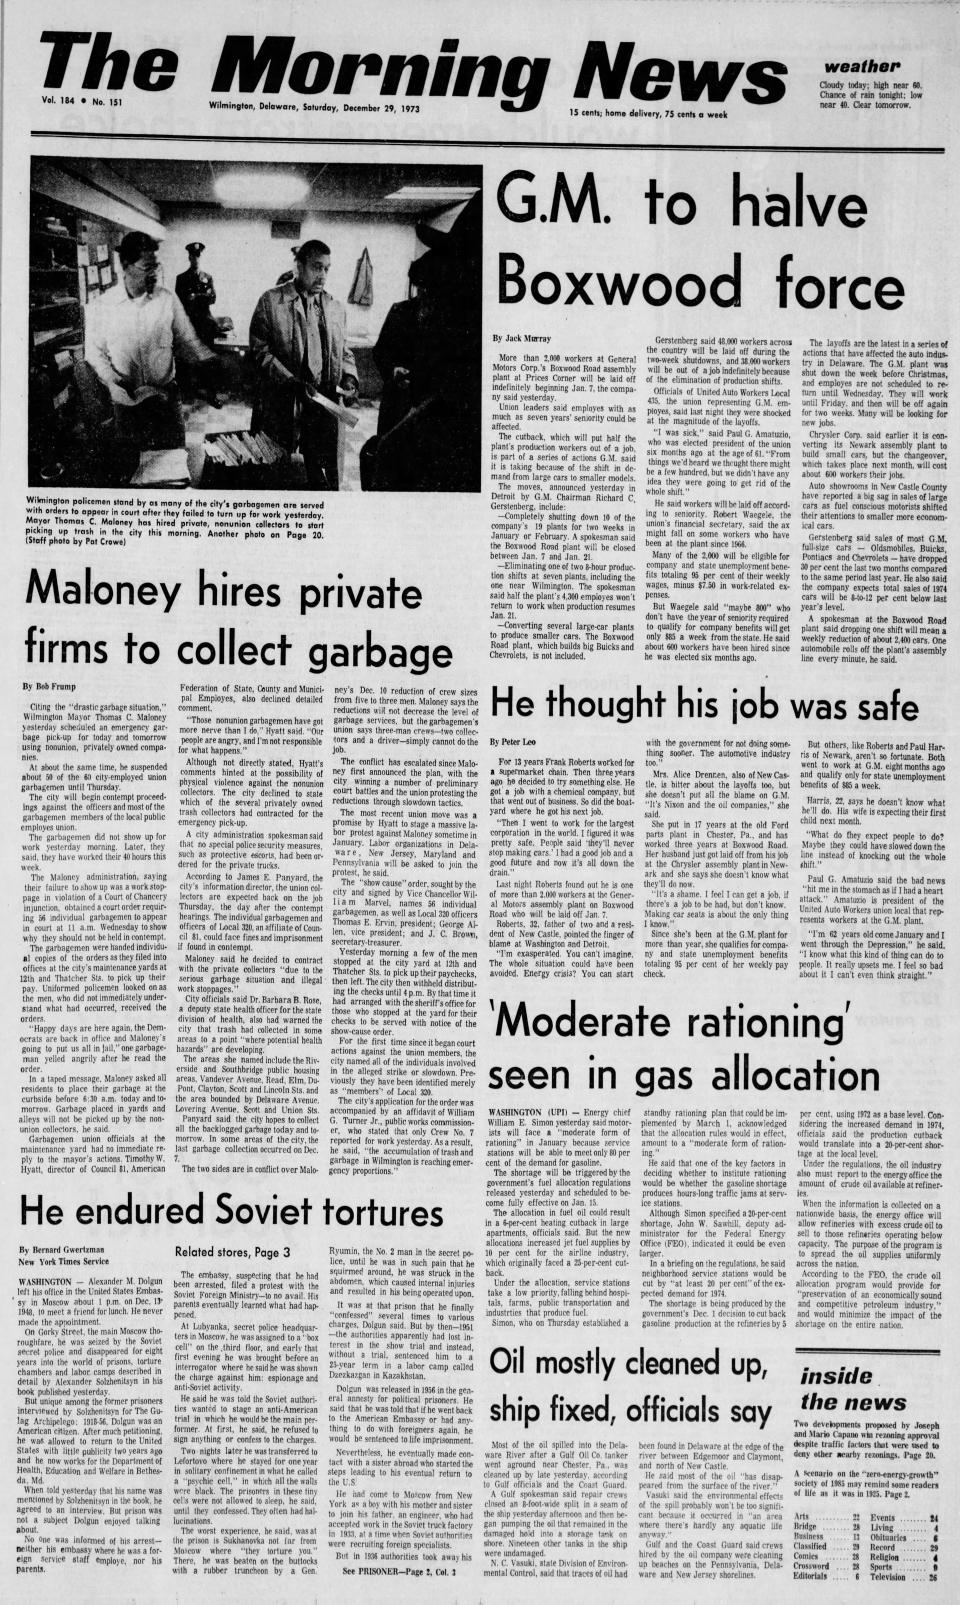 Front page of The Morning News from Dec. 29, 1973.